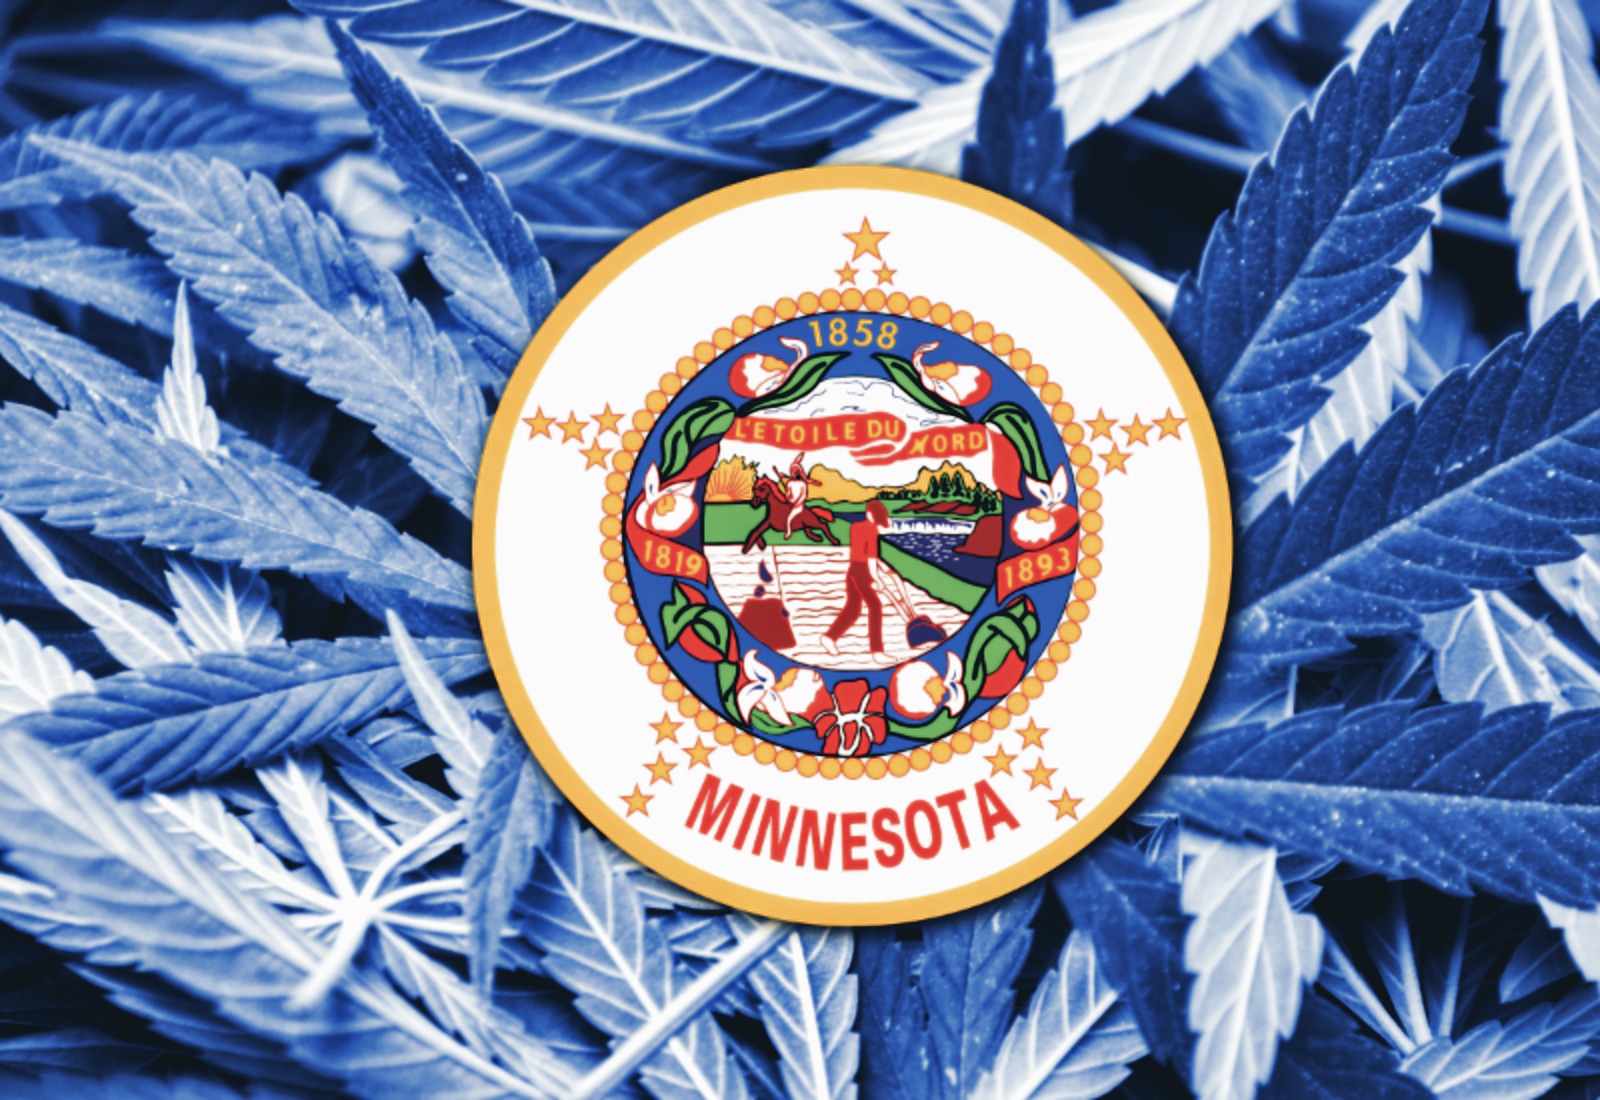 Minnesota is 23rd State to Legalize Weed